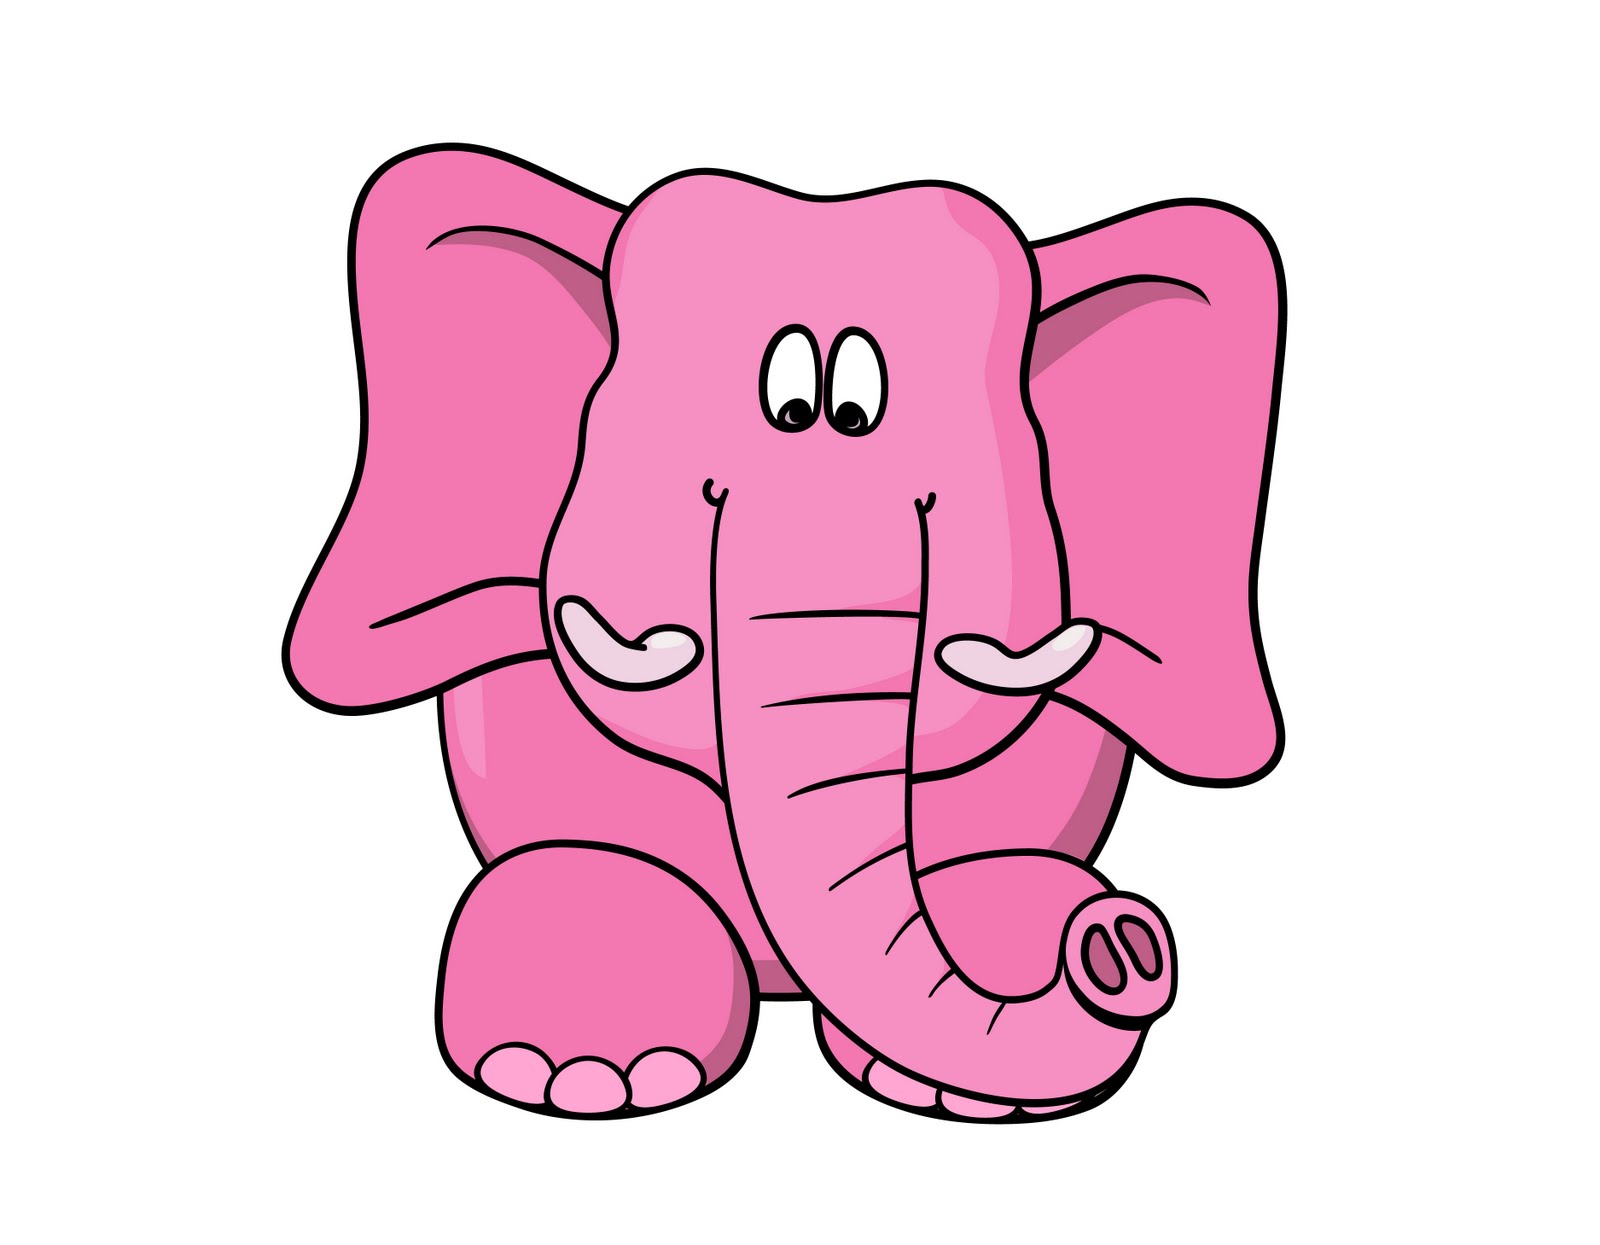 Cute Elephant 14712 Hd Wallpapers in Animals - Imagesci. - ClipArt ...